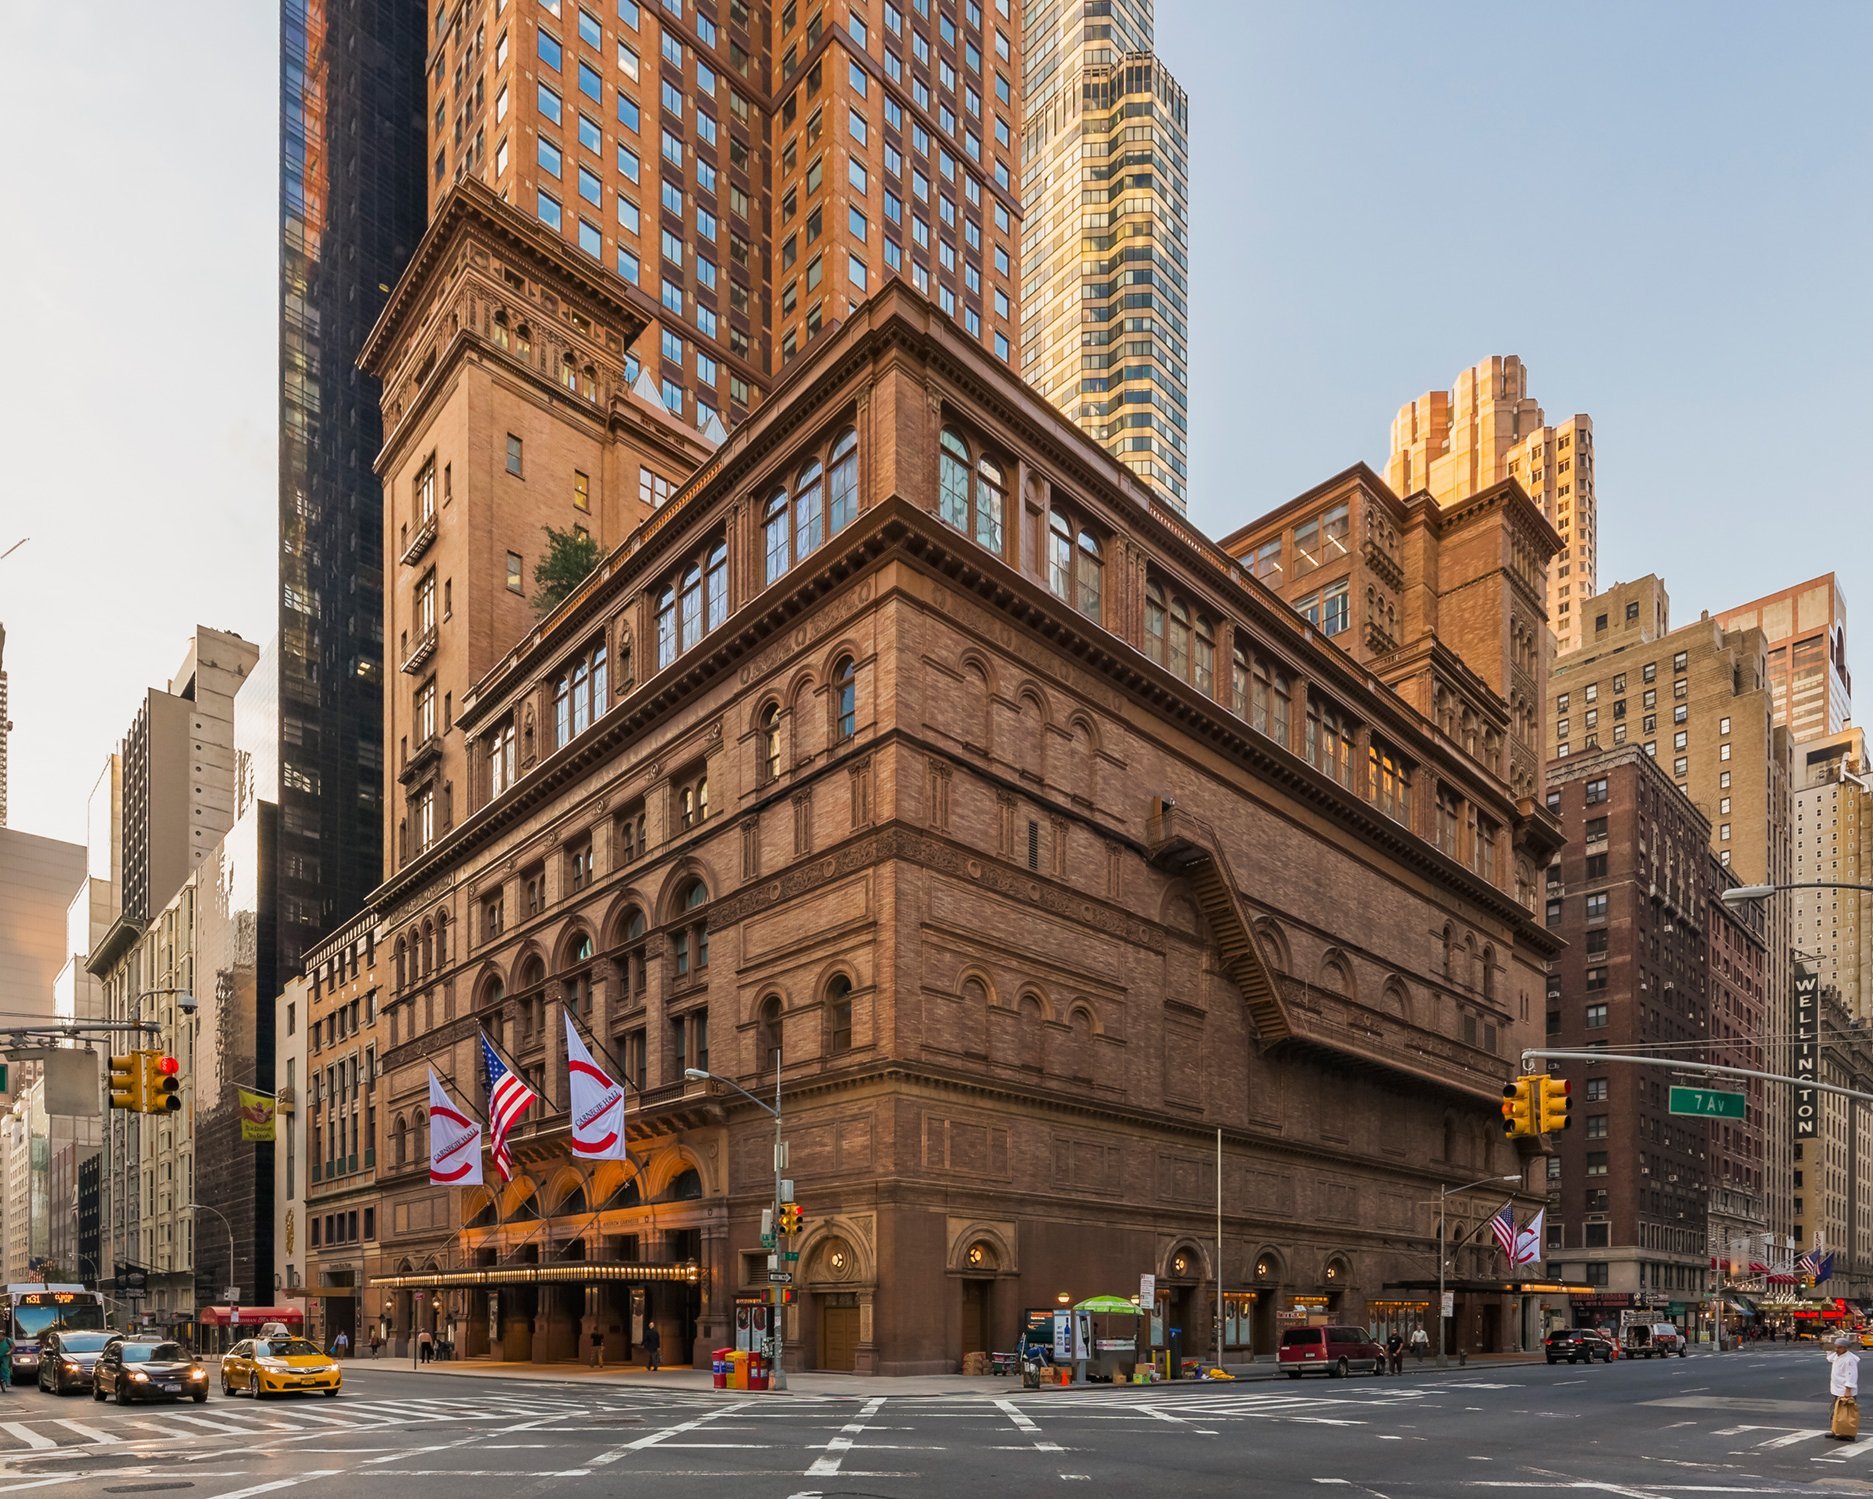 Facade of Carnegie Hall in New York